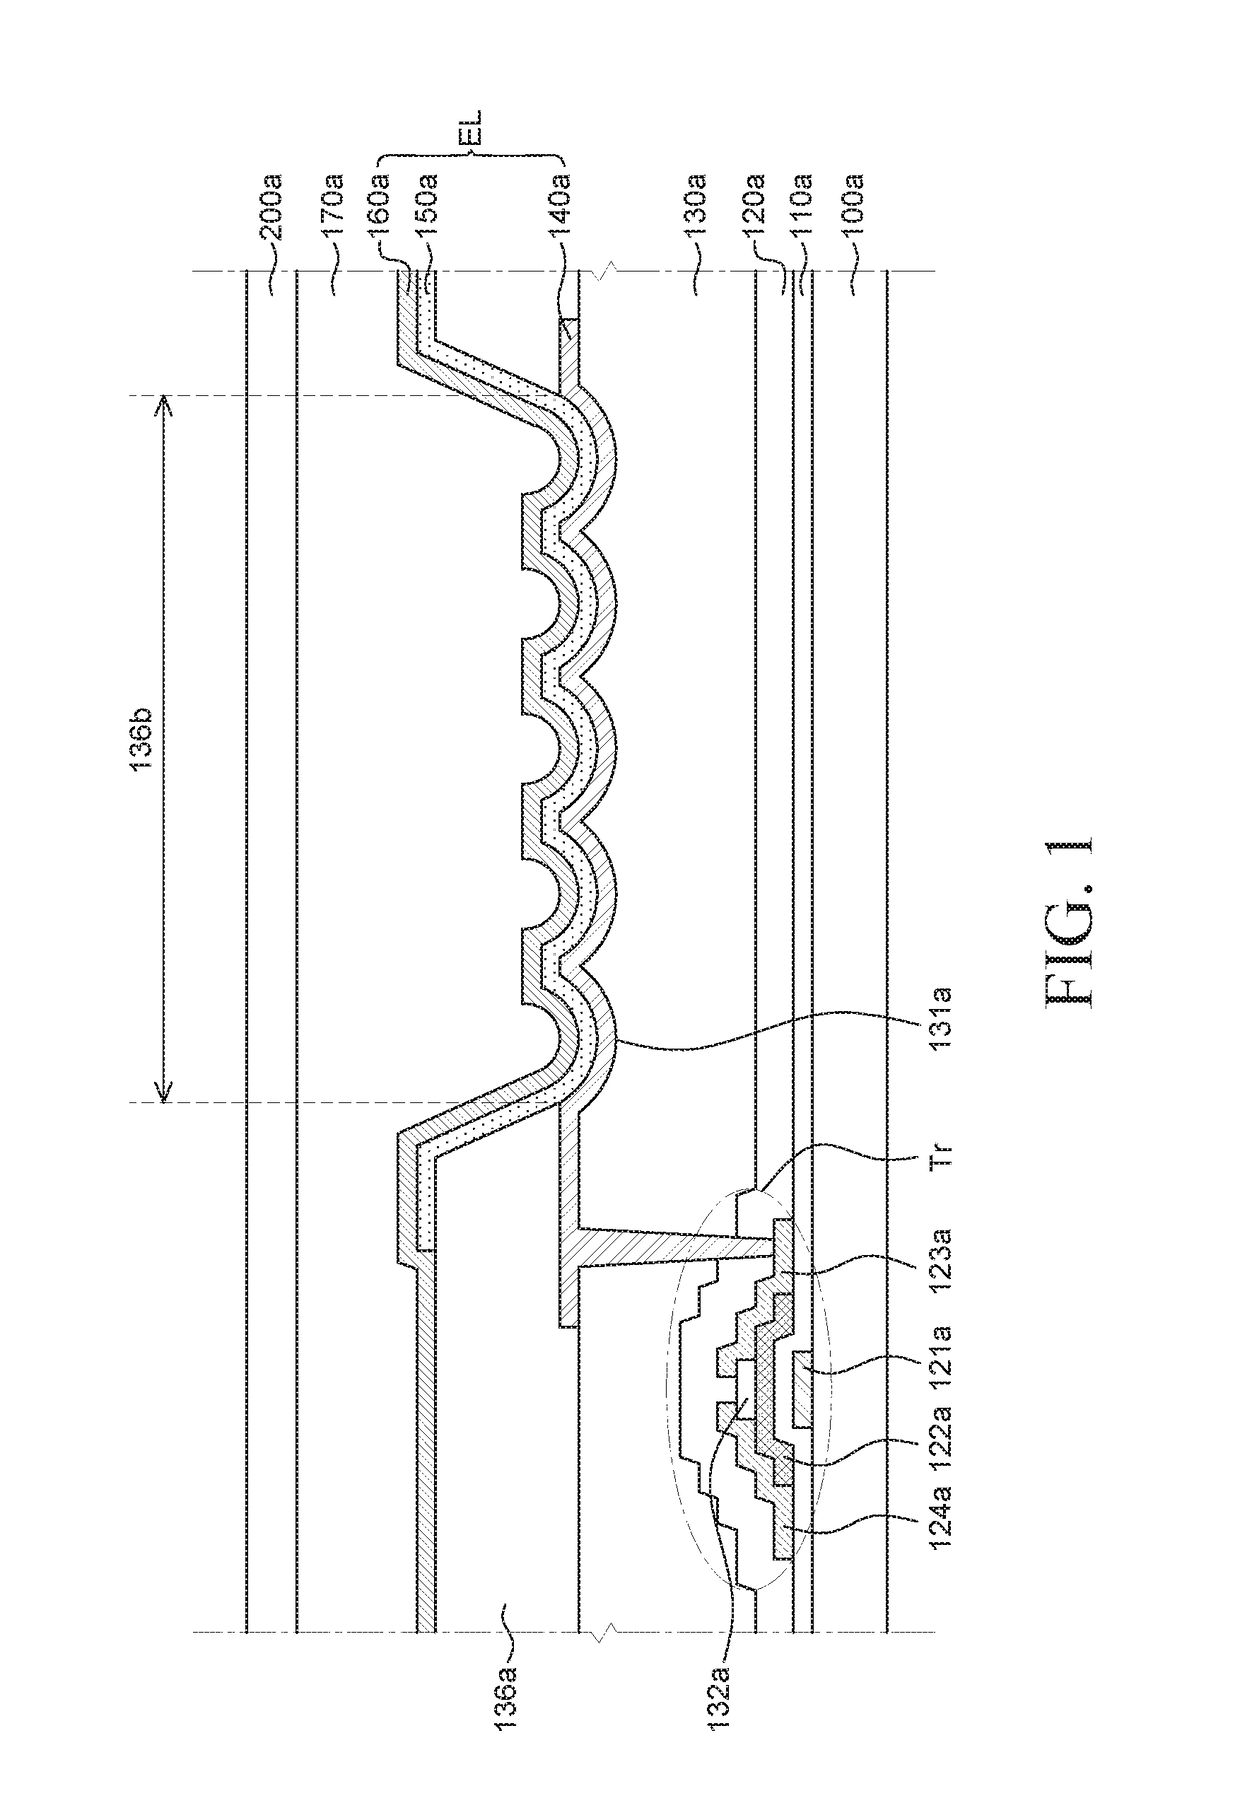 Substrate for organic light emitting display device and organic light emitting display device